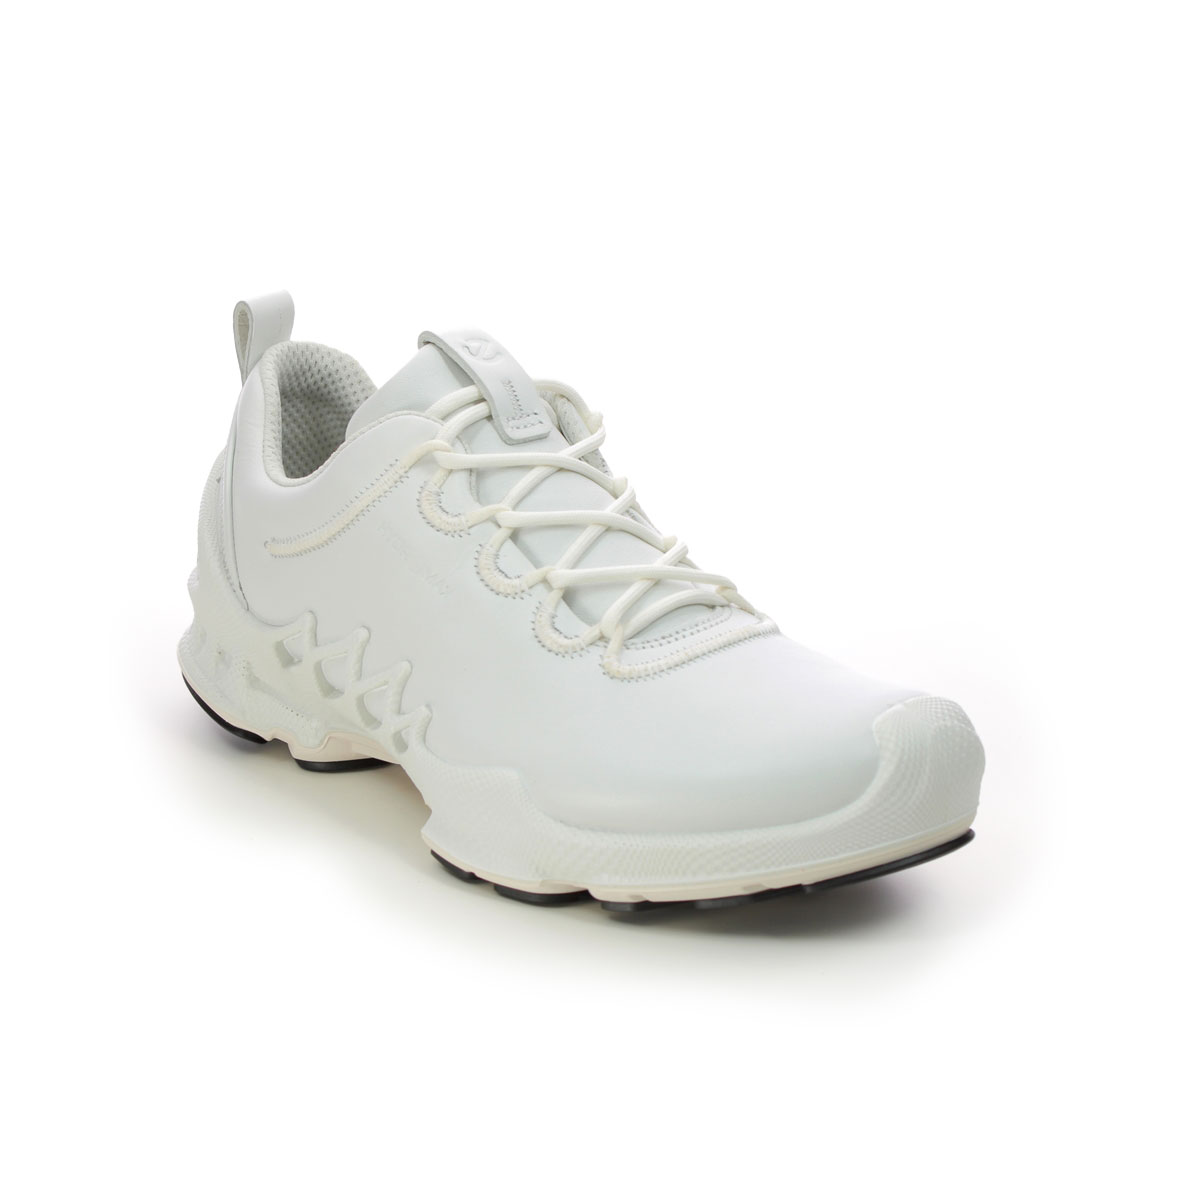 Ecco Biom Aex Hydromax White Leather Womens Trainers 802833-01007 In Size 39 In Plain White Leather